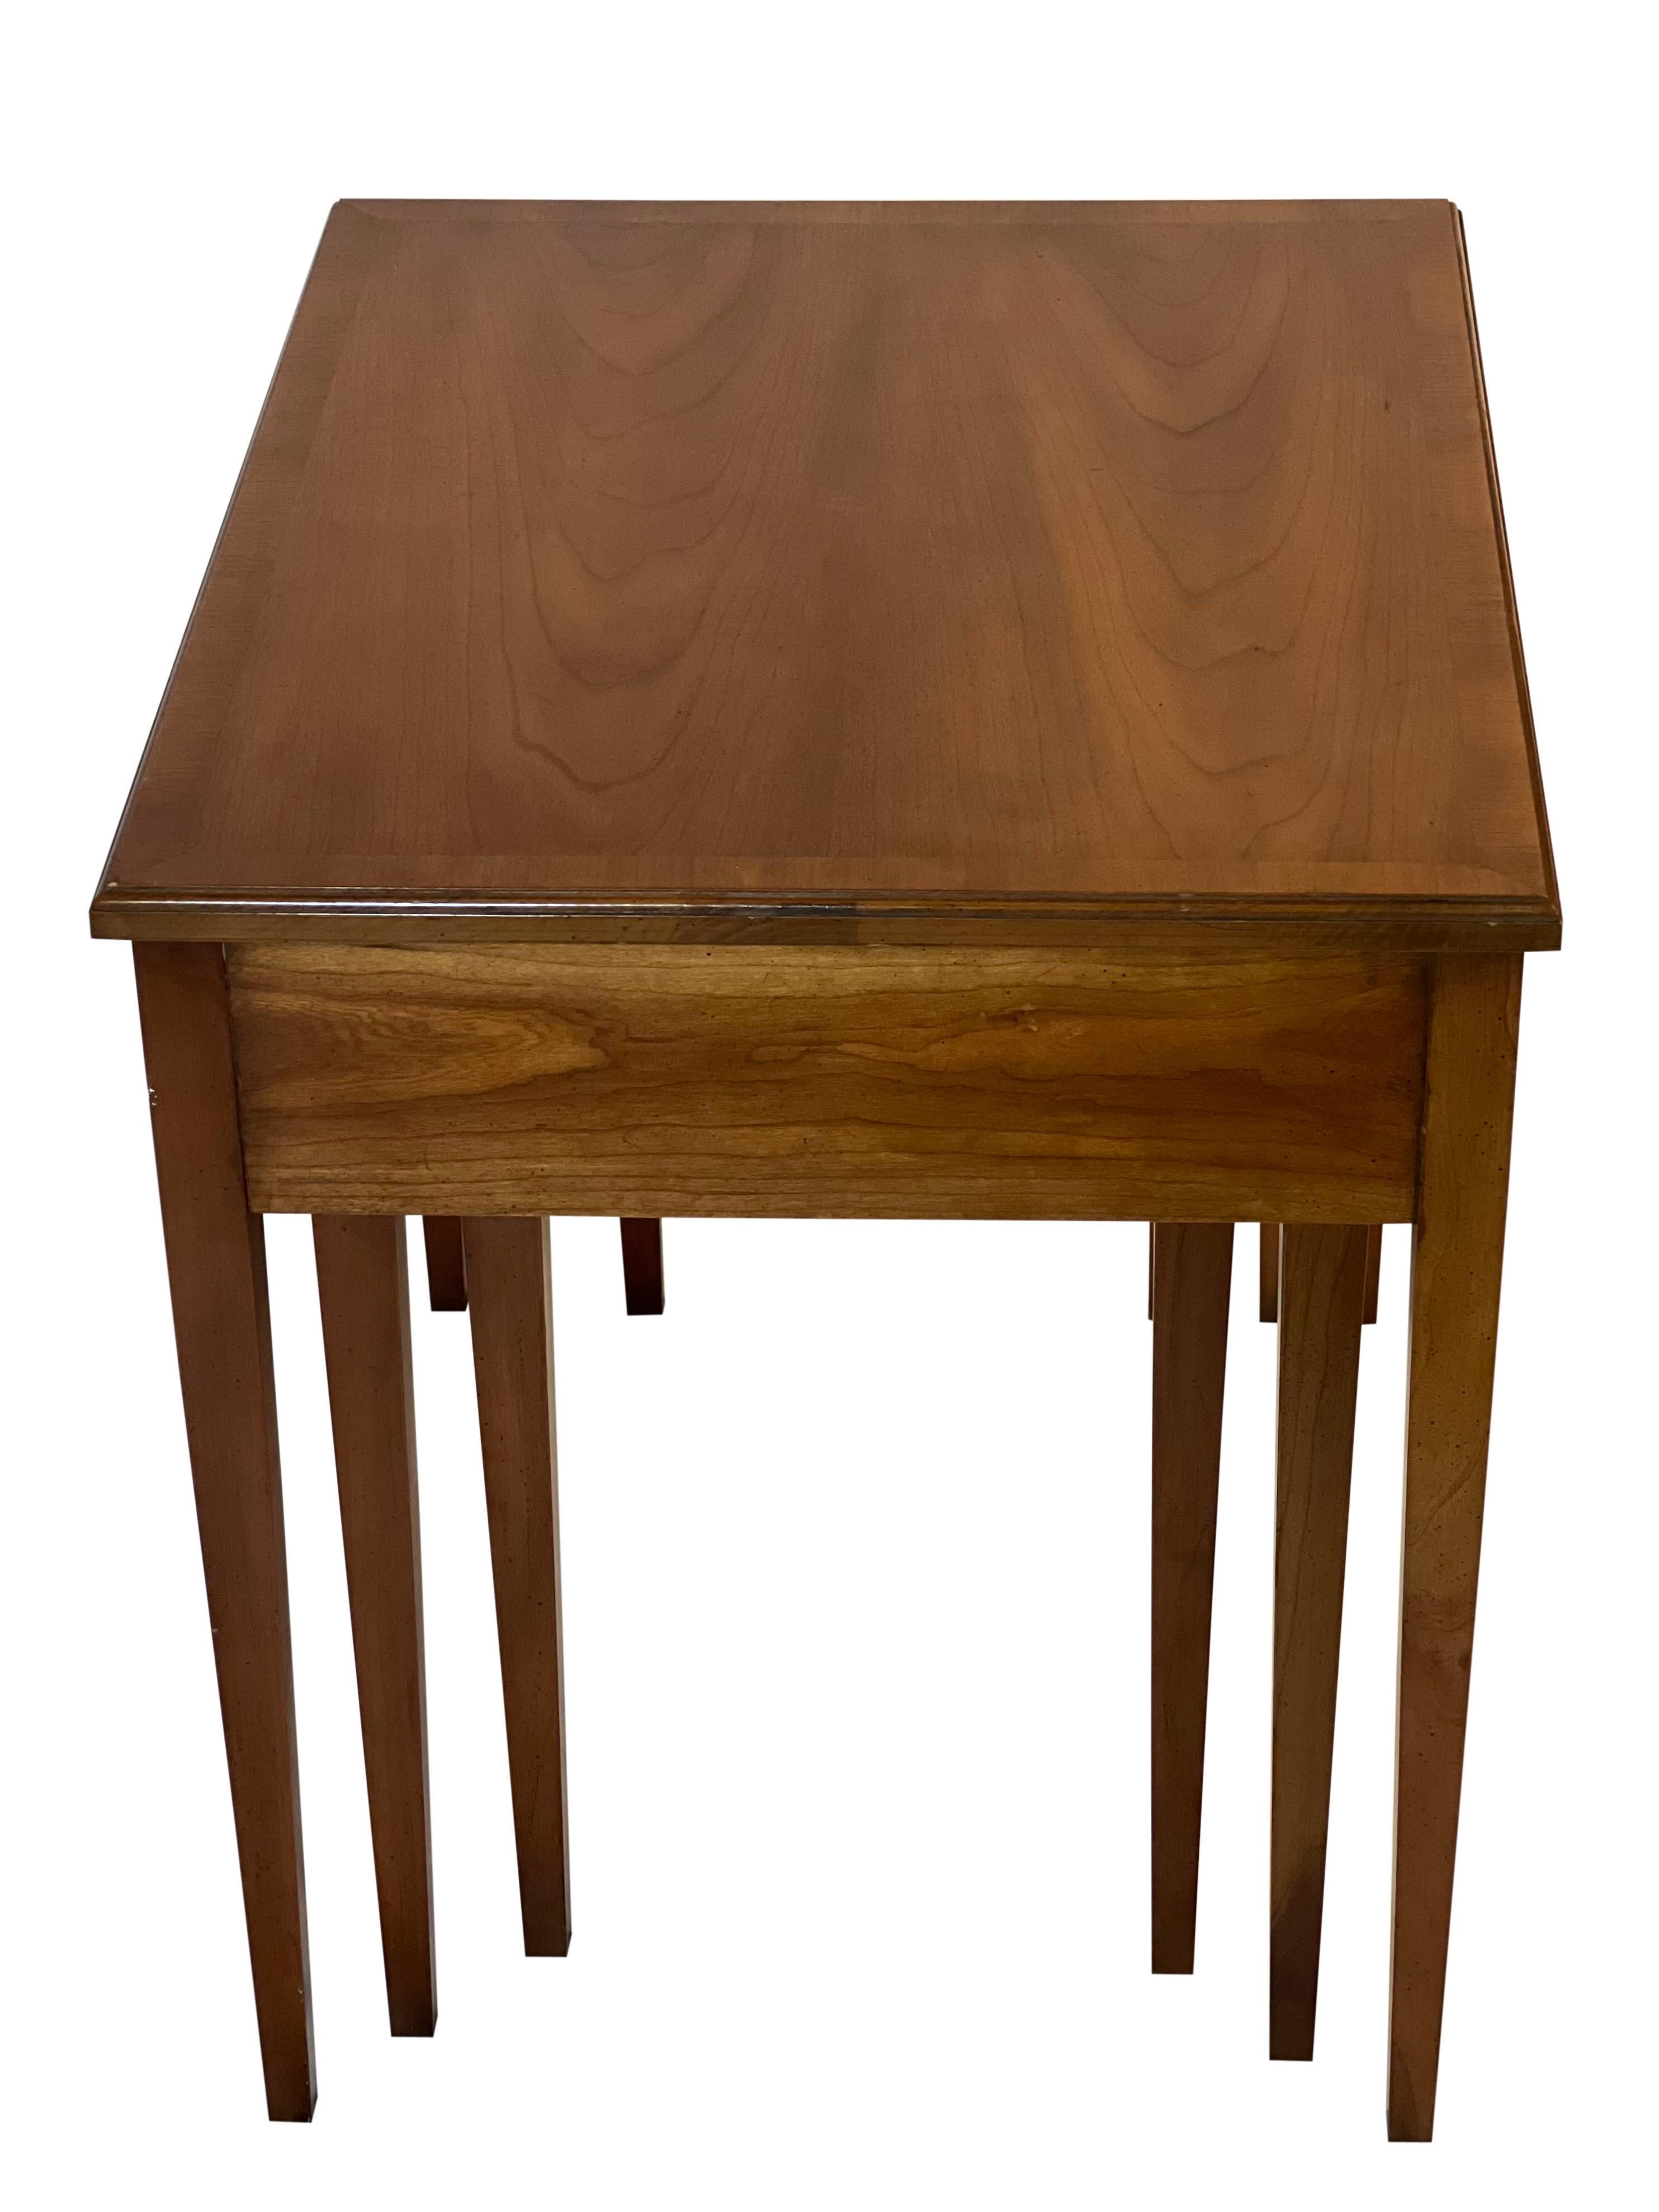 Midcentury Fruitwood Nesting Tables by Heritage, Set of 3 In Good Condition For Sale In Doylestown, PA